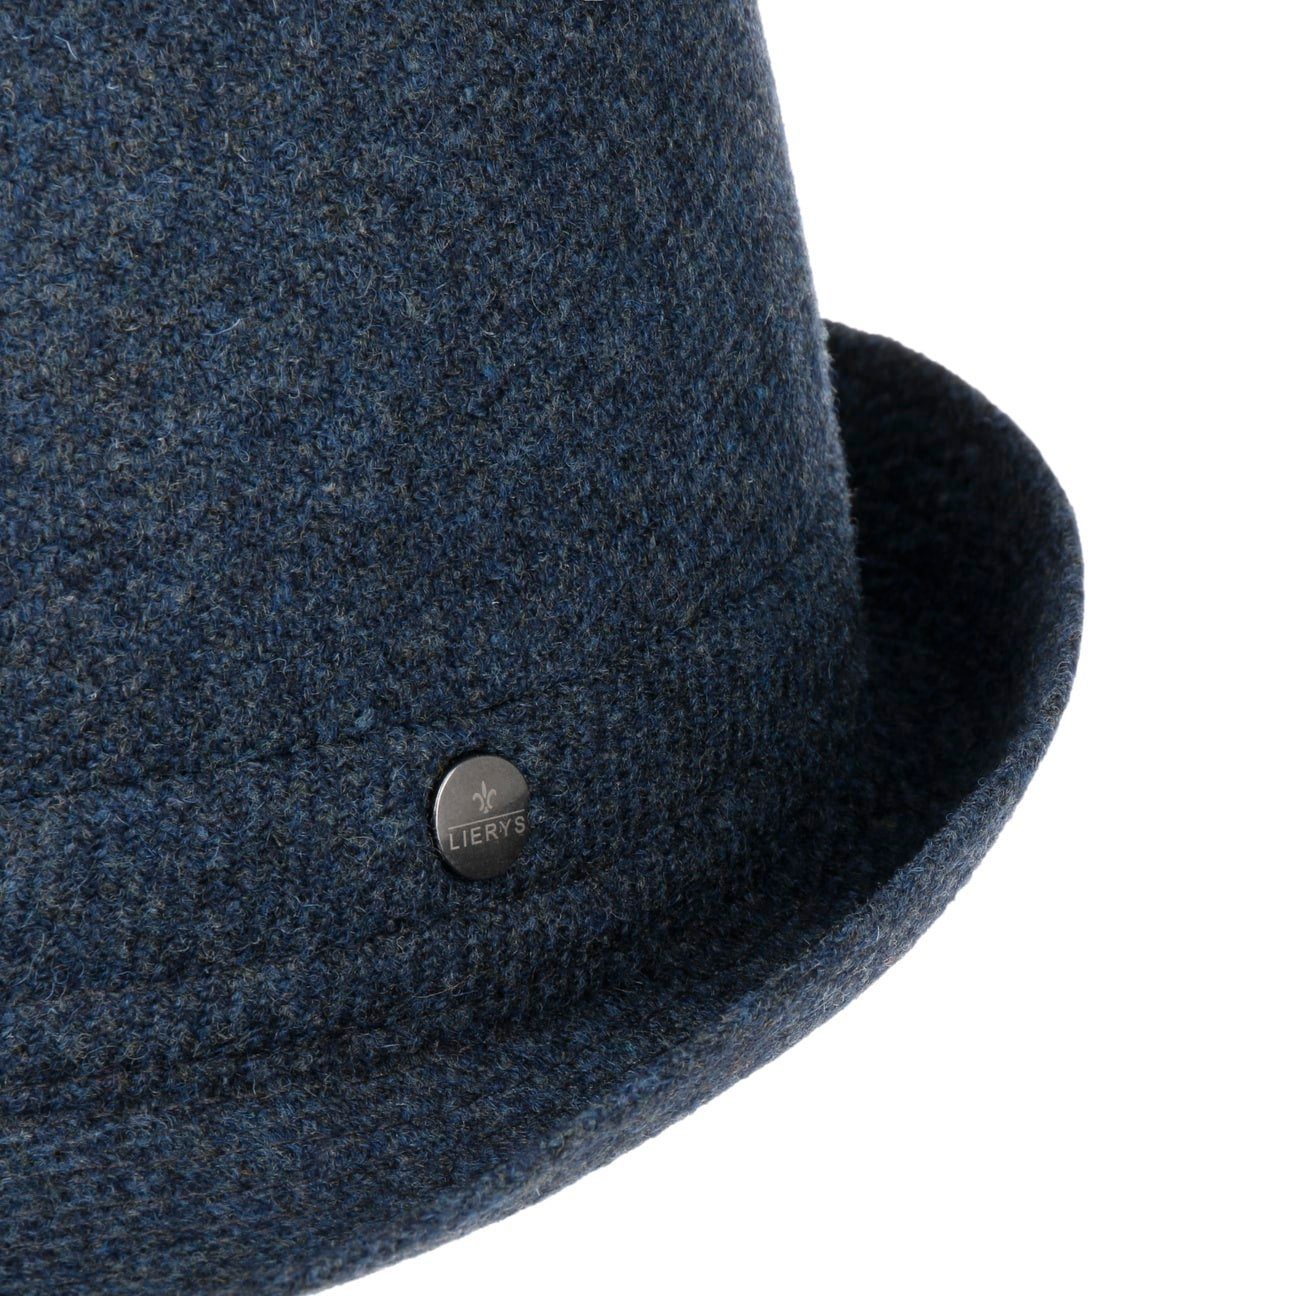 Lierys Trilby (1-St) Wolltrilby mit blau Italy Made Futter, in